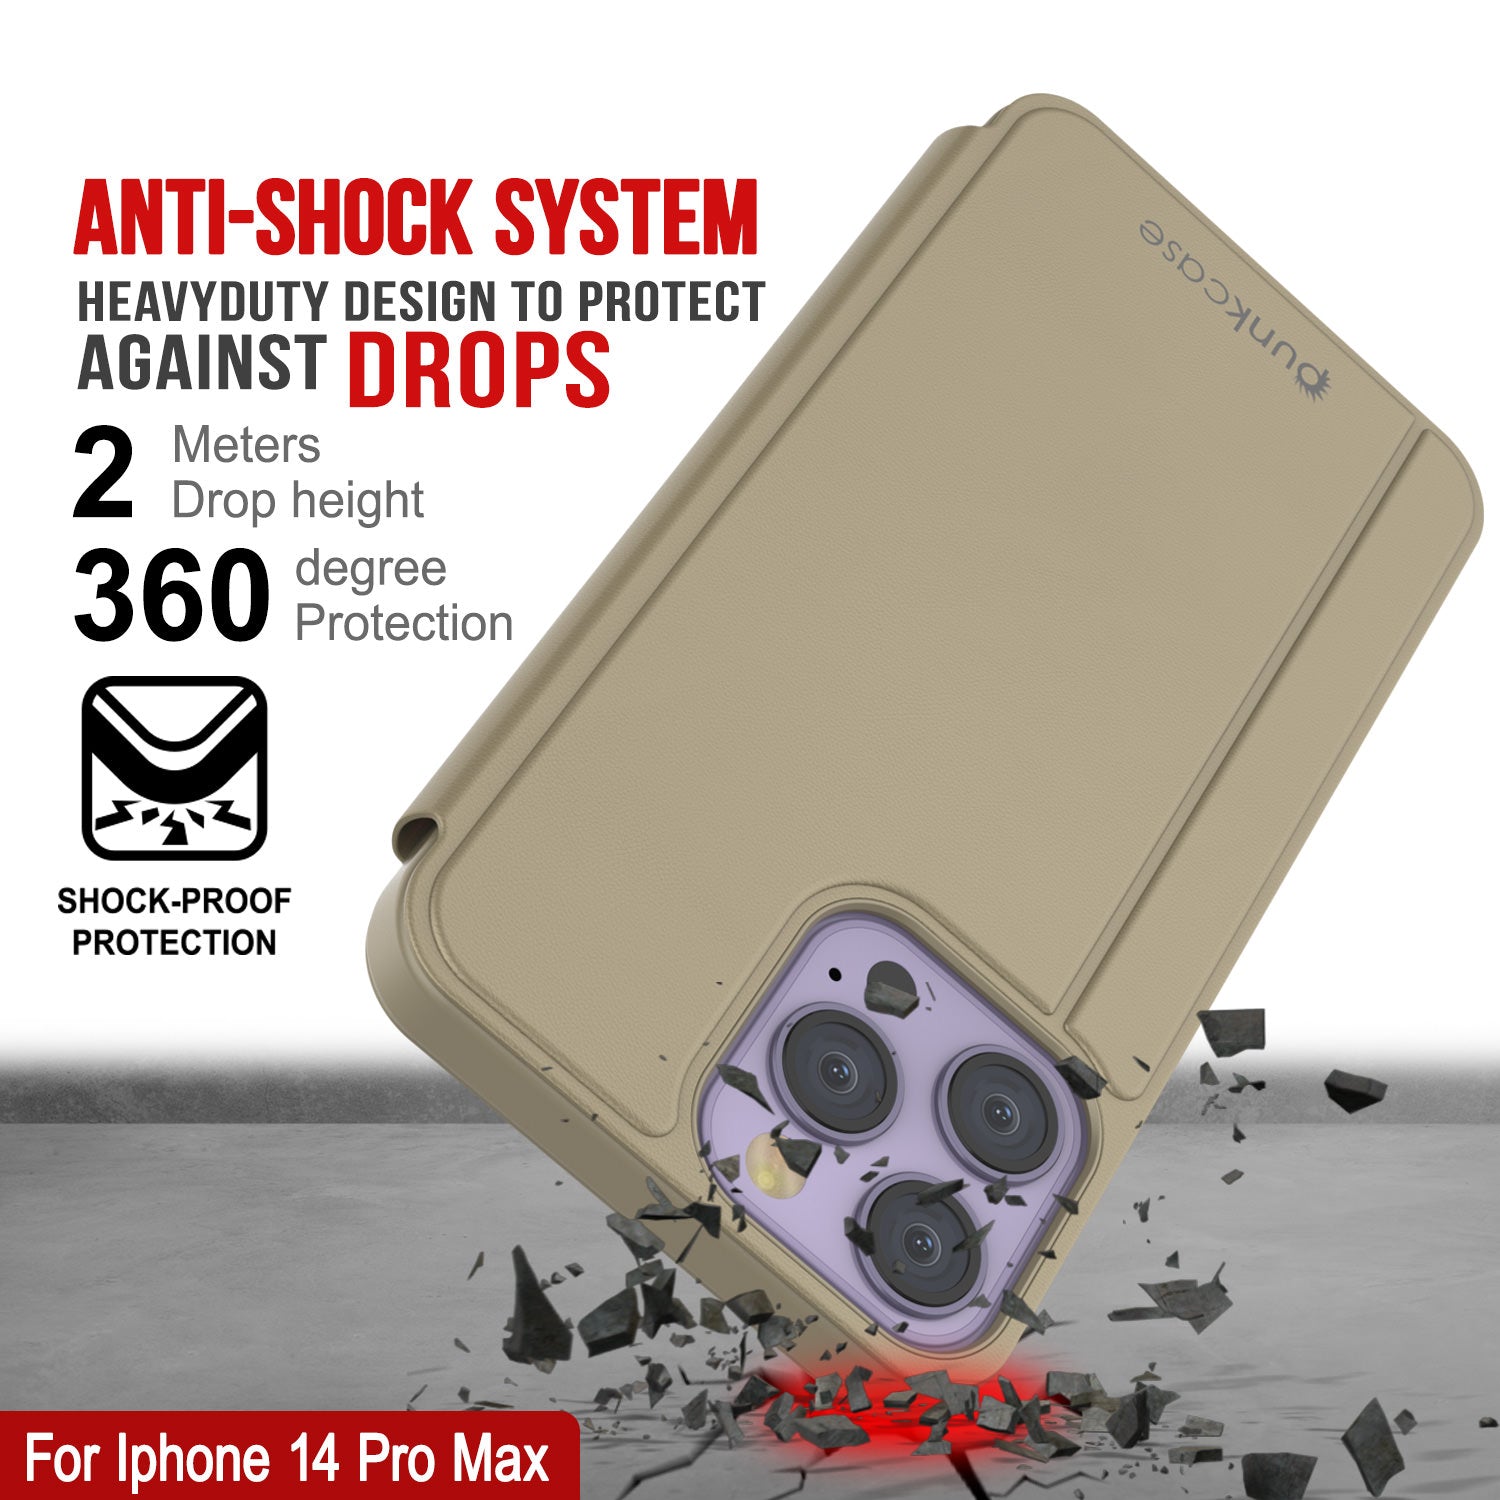 Punkcase iPhone 14 Pro Max Reflector Case Protective Flip Cover [Gold]